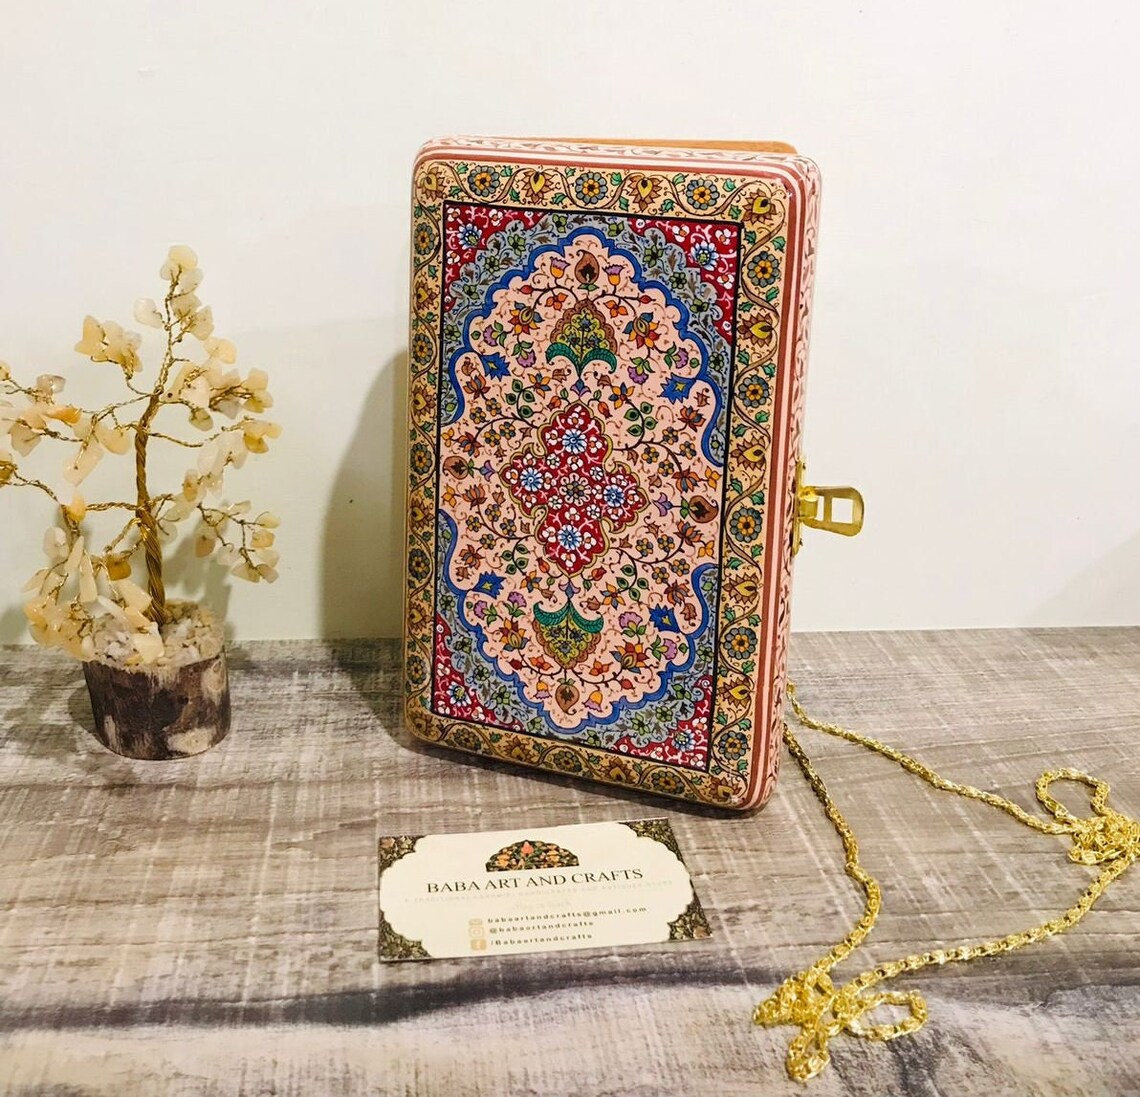 Boho Wallets, Luxury bags, Clutches with hand painted paper mache art, Papier mache clutches from Kashmir-